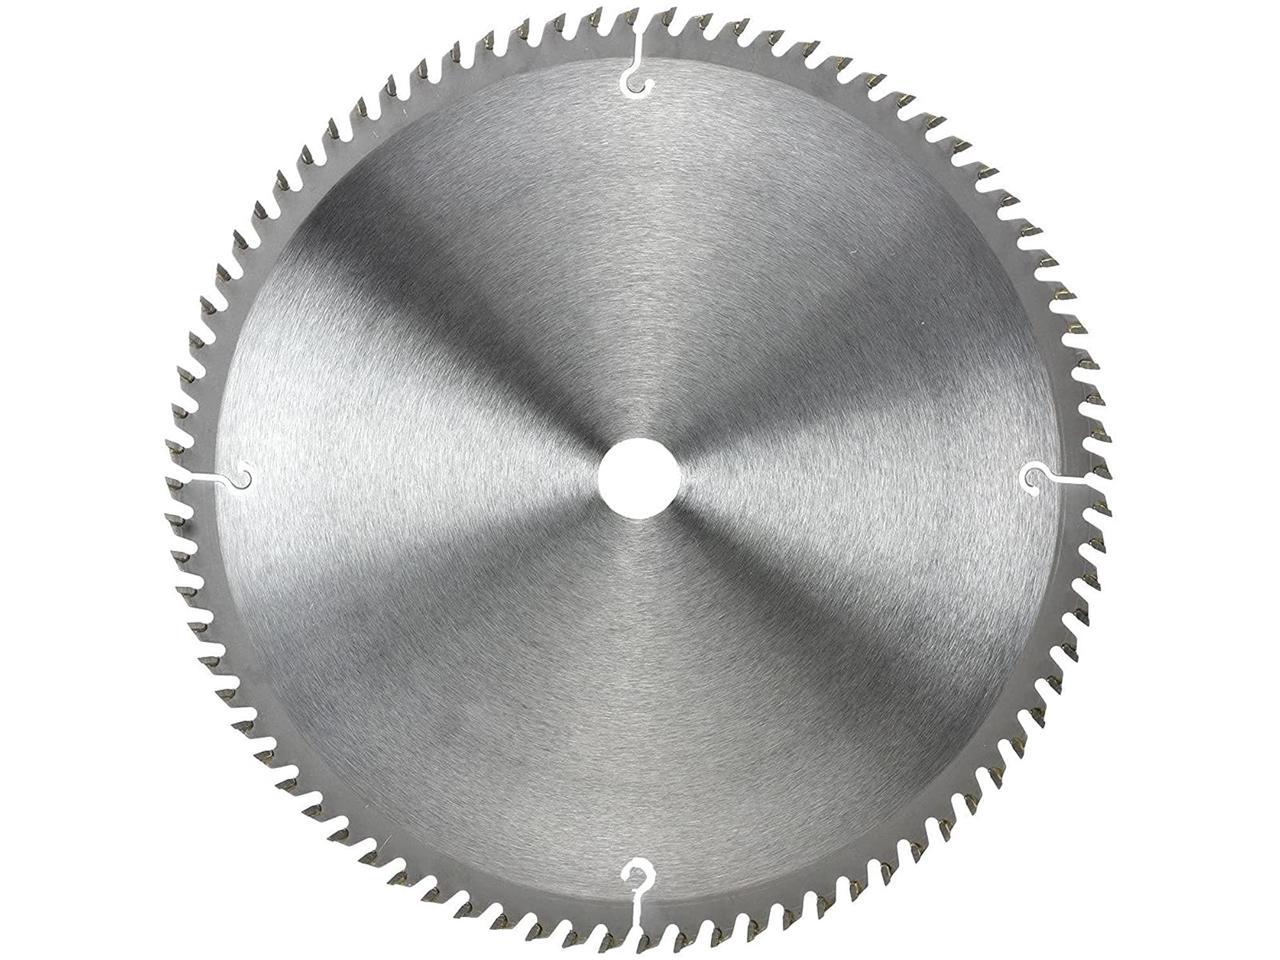 NEIKO 10768A 12" x 80 Tooth Carbide Tipped Wood Saw Blade New 